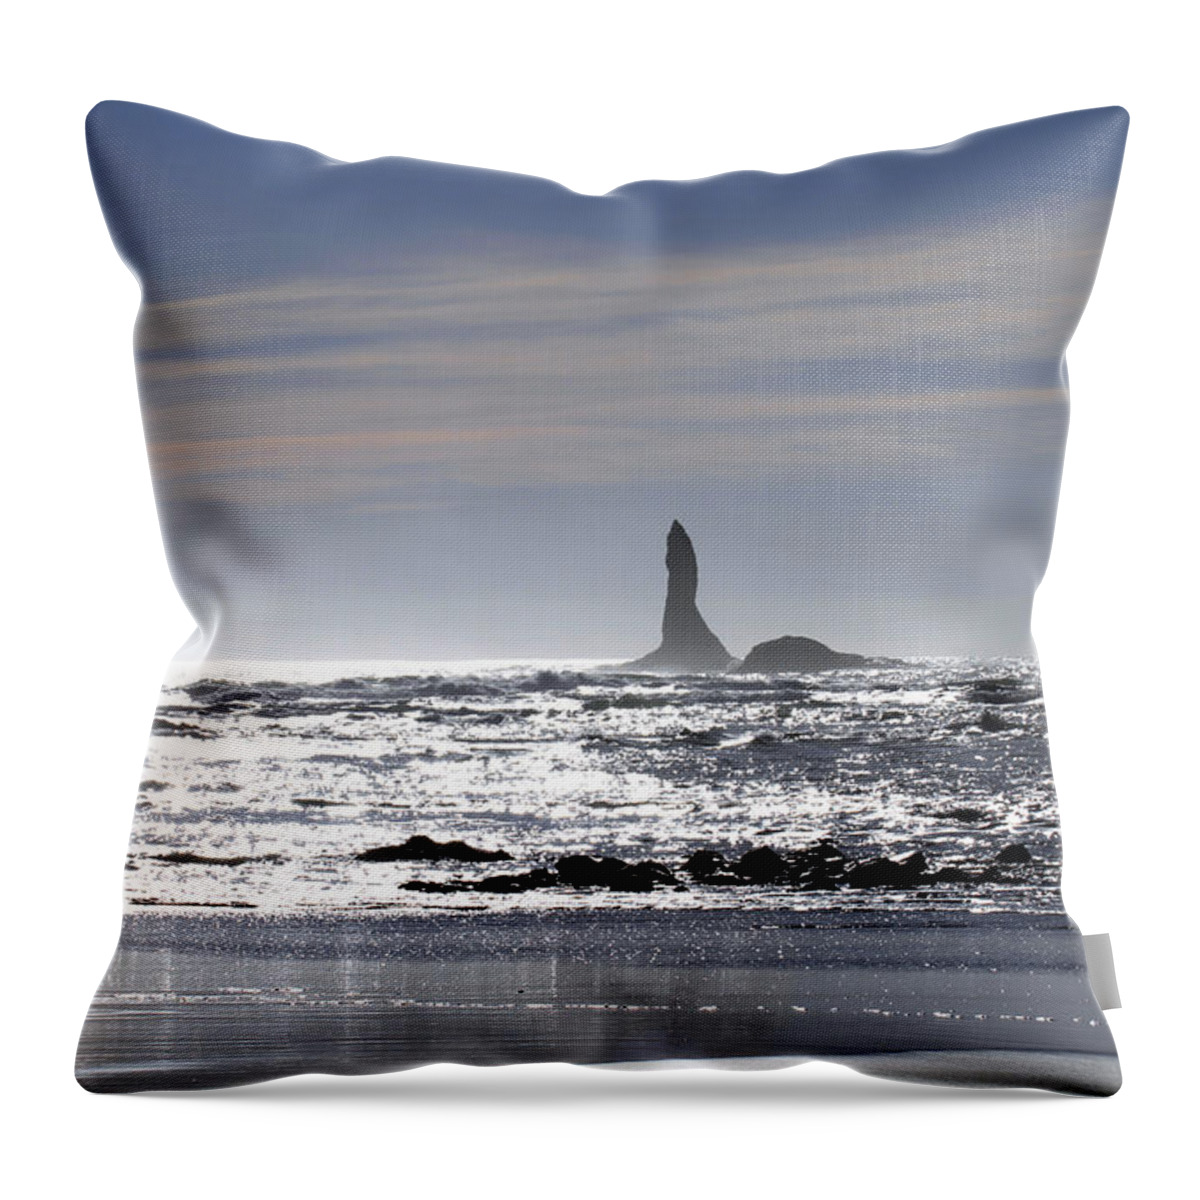 Sensational Seascape Throw Pillow featuring the photograph Silvery Ocean at Second Beach by Marie Jamieson